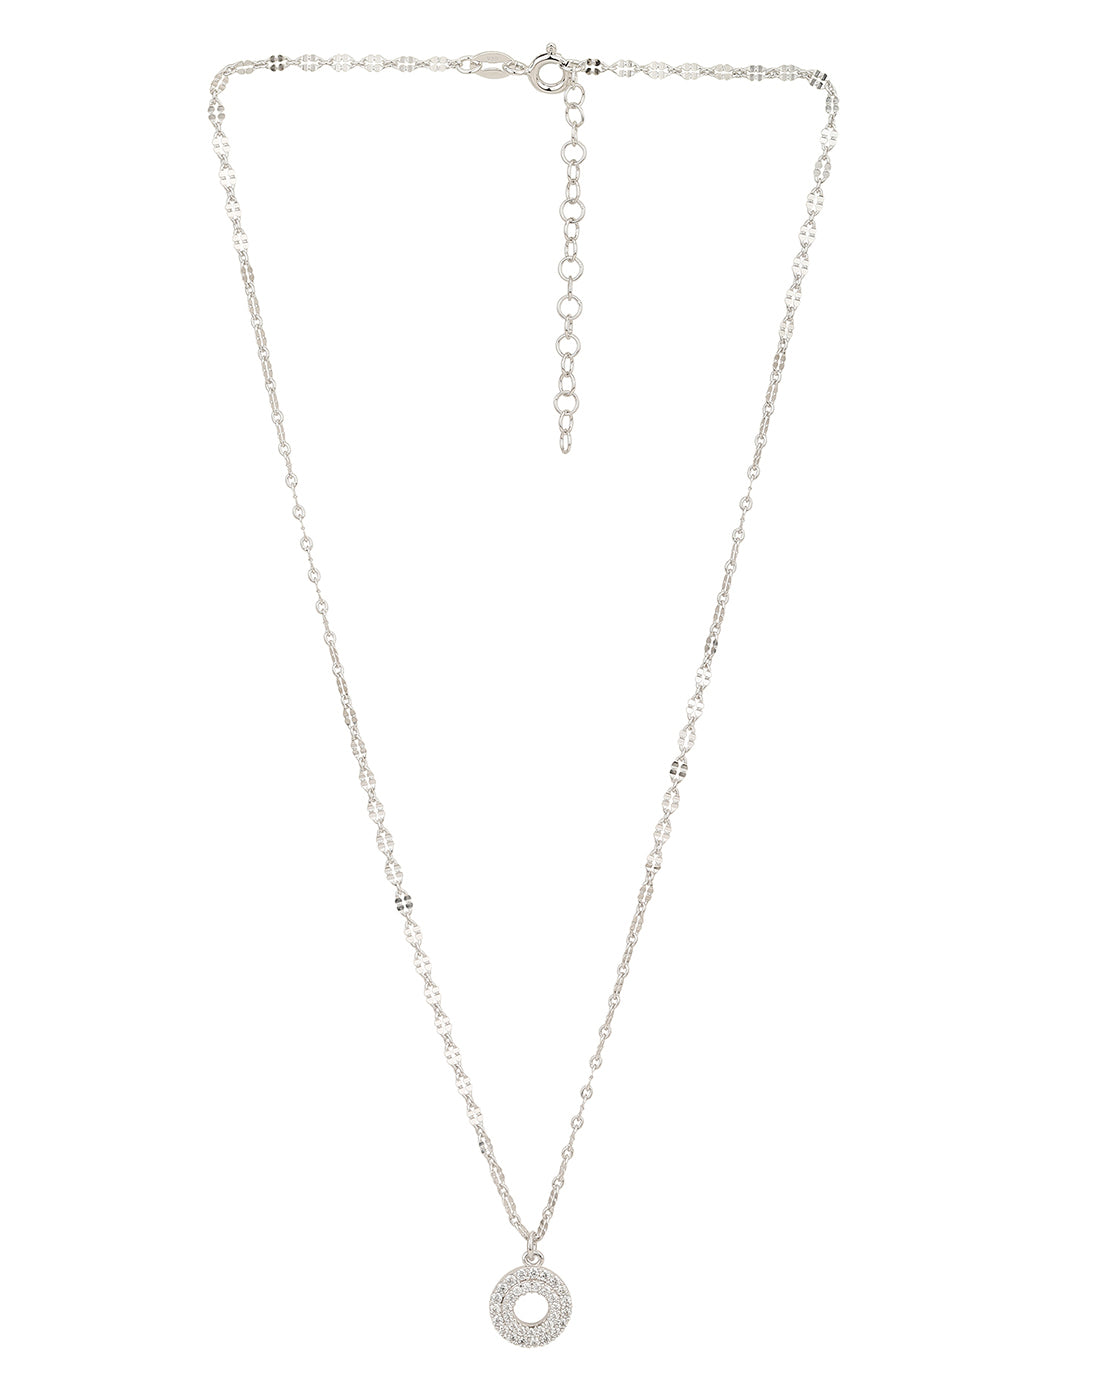 925 Sterling Silver Rhodium Plated With Cz Pendant And Chain